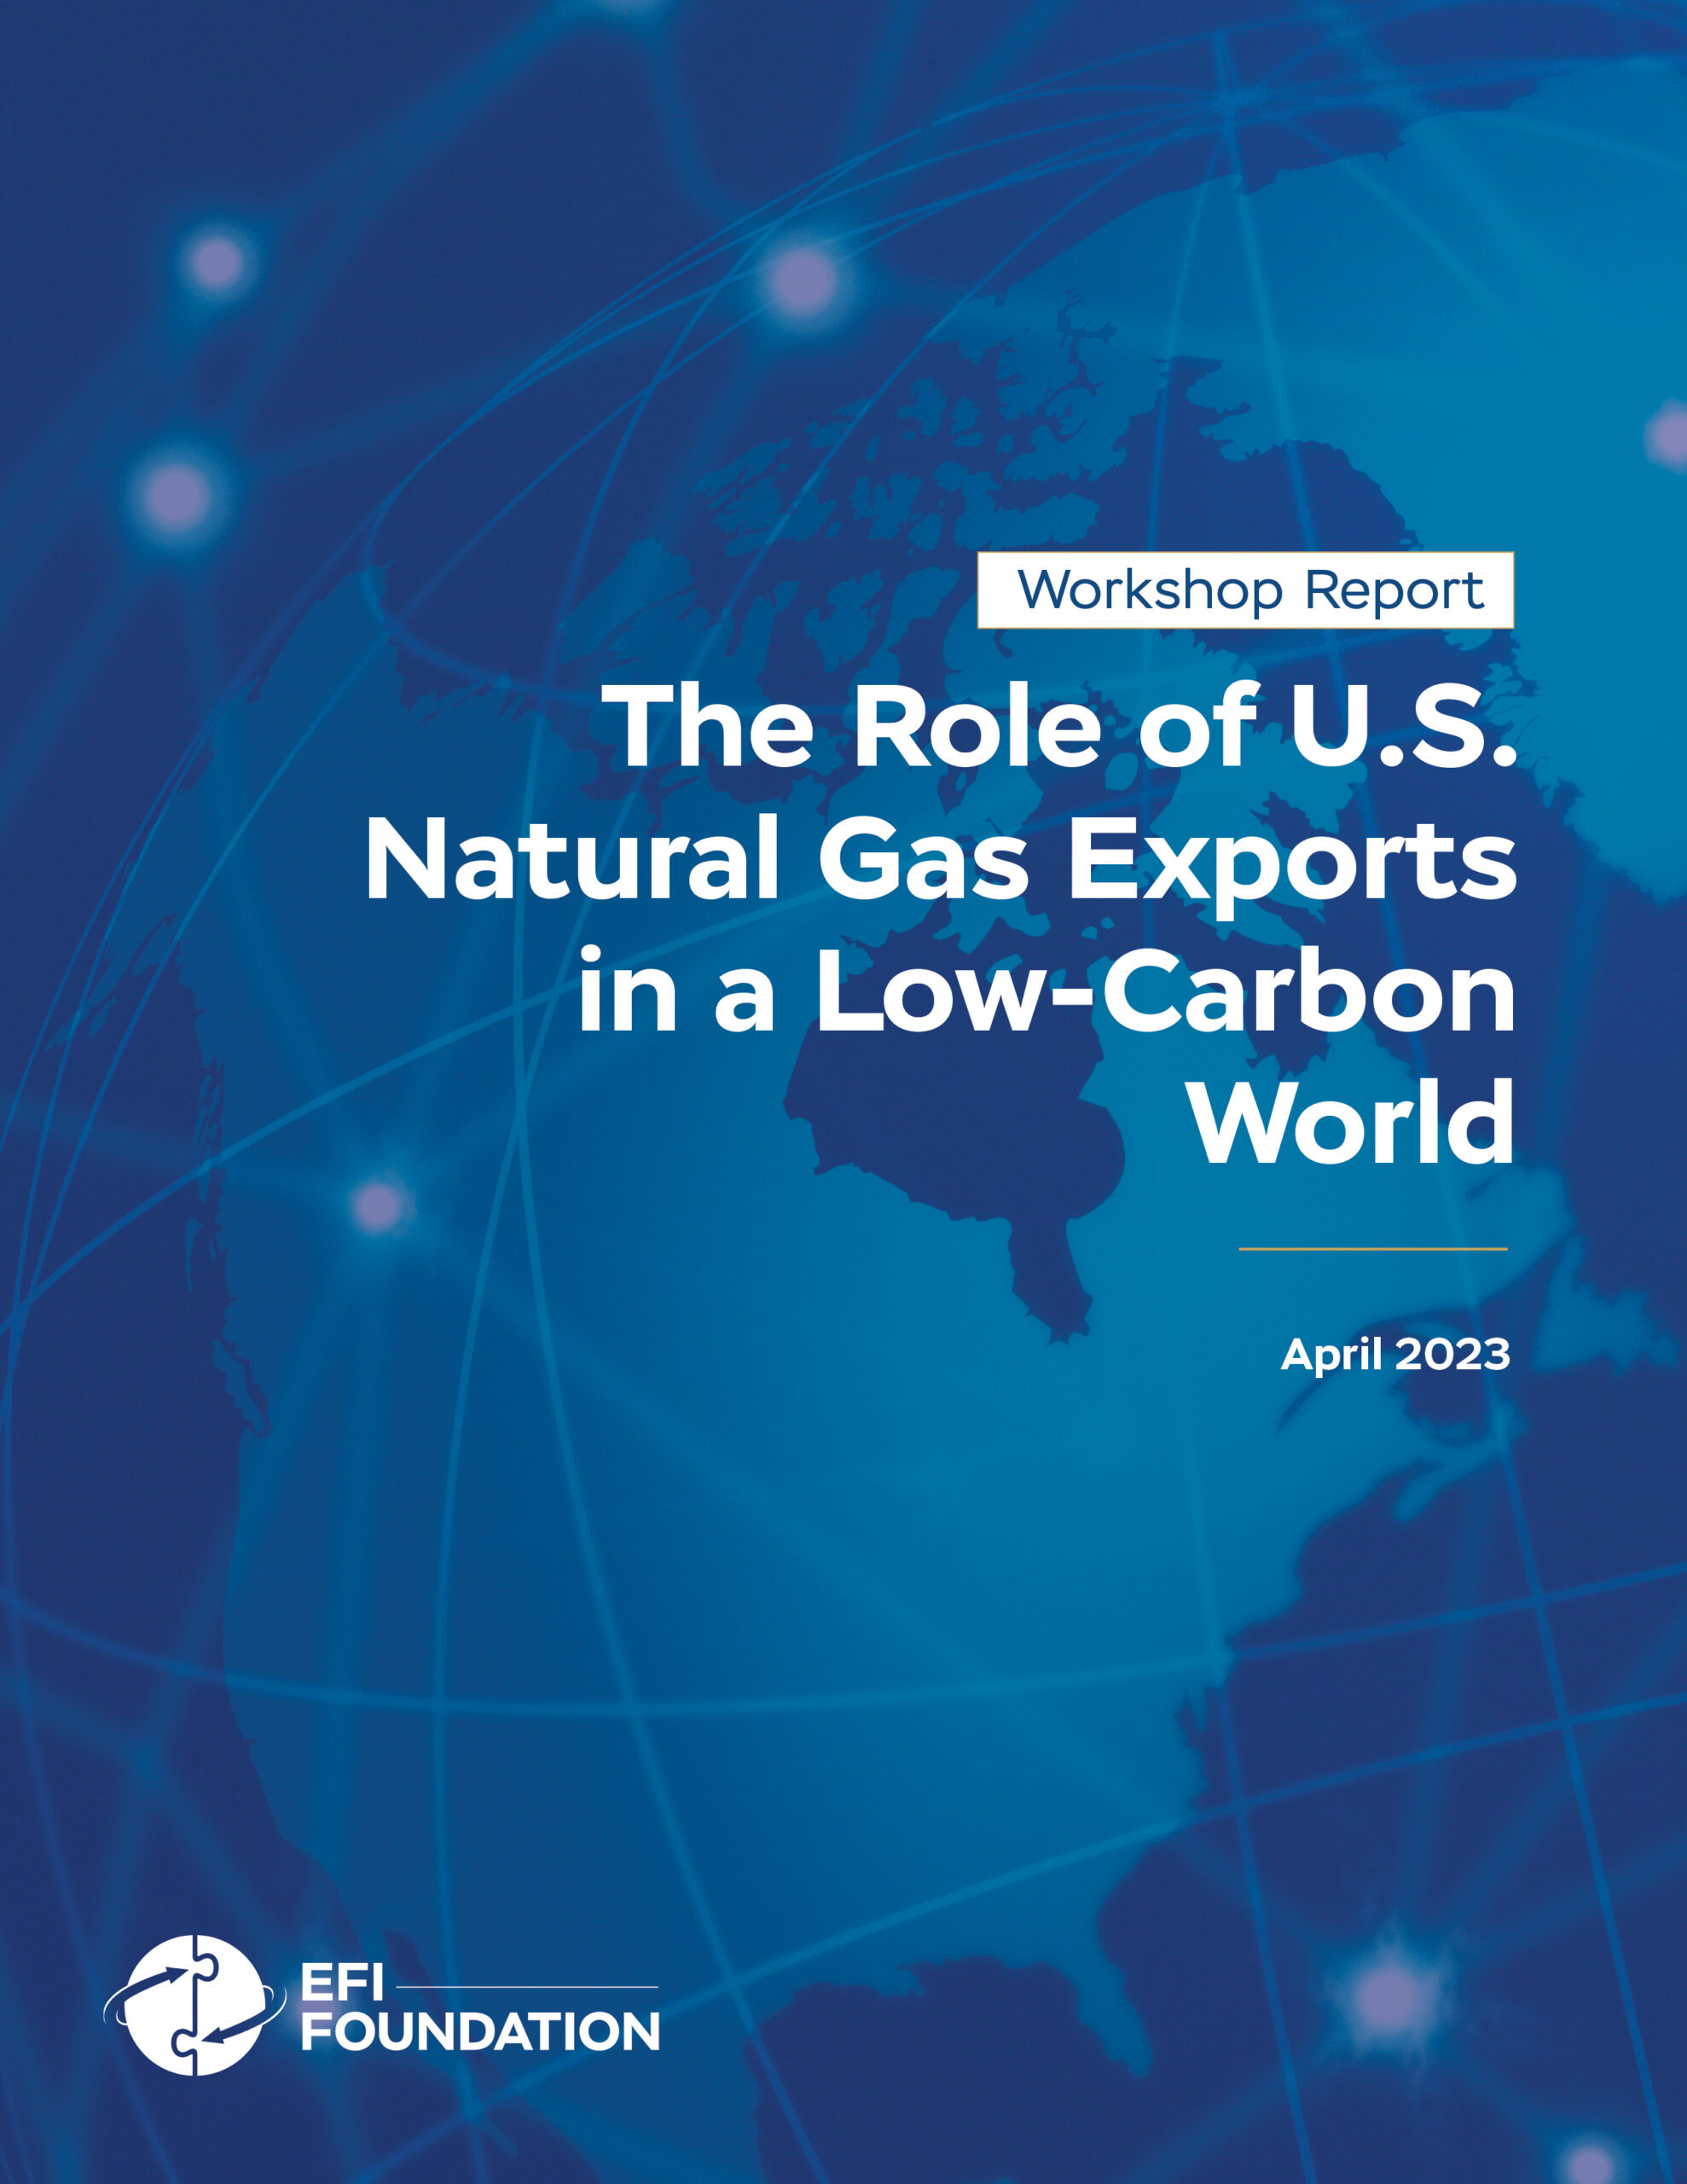 Photo of workshop report cover titled The Role of U.S. Natural Gas Exports in a Low-Carbon World, April 2023